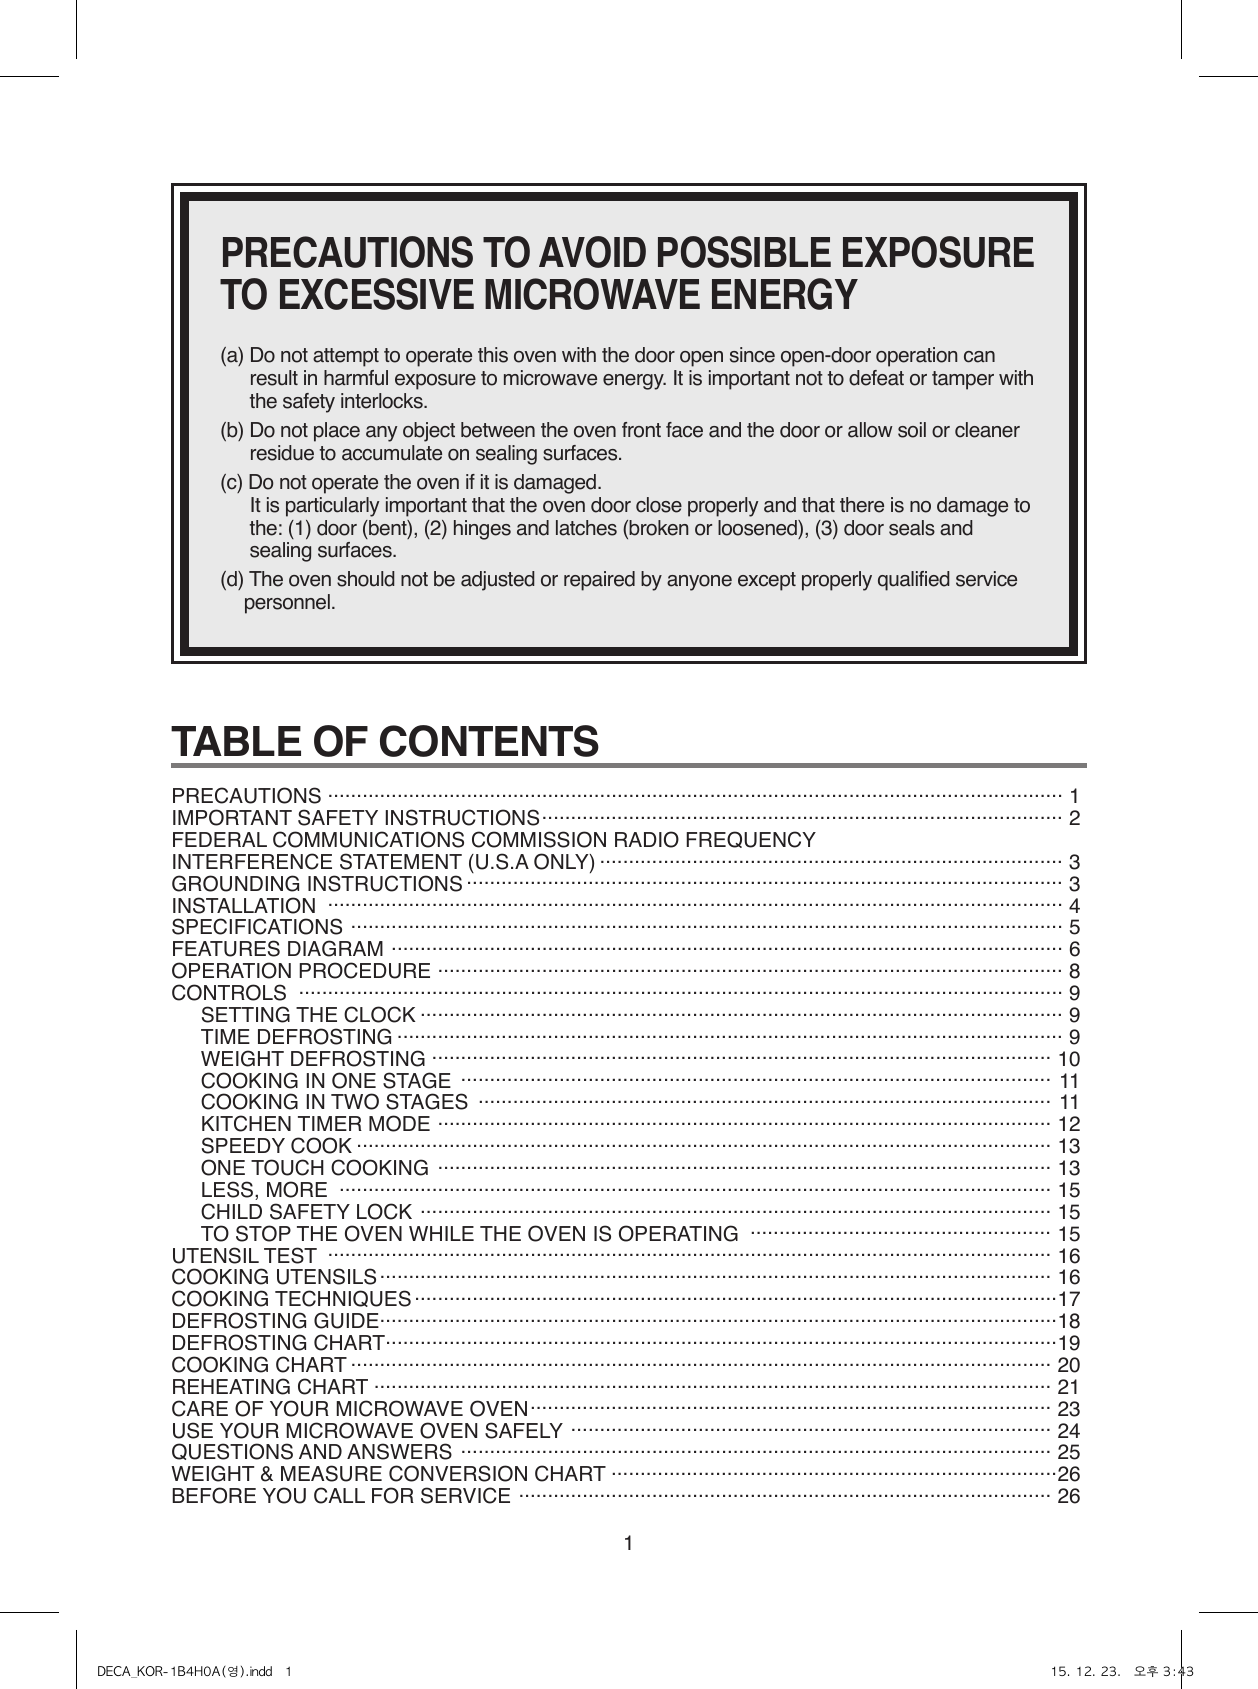 1TABLE OF CONTENTS PRECAUTIONS  ............................................................................................................................... 1 IMPORTANT SAFETY INSTRUCTIONS .......................................................................................... 2FEDERAL COMMUNICATIONS COMMISSION RADIO FREQUENCYINTERFERENCE STATEMENT (U.S.A ONLY) ................................................................................ 3GROUNDING INSTRUCTIONS ....................................................................................................... 3INSTALLATION  ............................................................................................................................... 4SPECIFICATIONS  ........................................................................................................................... 5FEATURES DIAGRAM  .................................................................................................................... 6OPERATION PROCEDURE  ............................................................................................................ 8CONTROLS   .................................................................................................................................... 9SETTING THE CLOCK ............................................................................................................... 9TIME DEFROSTING ................................................................................................................... 9WEIGHT DEFROSTING ........................................................................................................... 10COOKING IN ONE STAGE  ...................................................................................................... 11COOKING IN TWO STAGES  ................................................................................................... 11KITCHEN TIMER MODE  ..........................................................................................................  12SPEEDY COOK ........................................................................................................................ 13ONE TOUCH COOKING  .......................................................................................................... 13LESS, MORE  ........................................................................................................................... 15CHILD SAFETY LOCK  ............................................................................................................. 15TO STOP THE OVEN WHILE THE OVEN IS OPERATING  .................................................... 15UTENSIL TEST  ............................................................................................................................. 16COOKING UTENSILS .................................................................................................................... 16COOKING TECHNIQUES ...............................................................................................................17DEFROSTING GUIDE .....................................................................................................................18DEFROSTING CHART ....................................................................................................................19COOKING CHART ......................................................................................................................... 20REHEATING CHART ..................................................................................................................... 21CARE OF YOUR MICROWAVE OVEN .......................................................................................... 23USE YOUR MICROWAVE OVEN SAFELY  ................................................................................... 24QUESTIONS AND ANSWERS  ...................................................................................................... 25WEIGHT &amp; MEASURE CONVERSION CHART .............................................................................26BEFORE YOU CALL FOR SERVICE  ............................................................................................ 26PRECAUTIONS TO AVOID POSSIBLE EXPOSURE TO EXCESSIVE MICROWAVE ENERGY(a) Do not attempt to operate this oven with the door open since open-door operation can result in harmful exposure to microwave energy. It is important not to defeat or tamper with the safety interlocks.(b) Do not place any object between the oven front face and the door or allow soil or cleaner residue to accumulate on sealing surfaces.(c) Do not operate the oven if it is damaged.  It is particularly important that the oven door close properly and that there is no damage to the: (1) door (bent), (2) hinges and latches (broken or loosened), (3) door seals and sealing surfaces.(d) The oven should not be adjusted or repaired by anyone except properly qualified service personnel.DECA_KOR-1B4H0A(영).indd   1 15. 12. 23.   오후 3:43